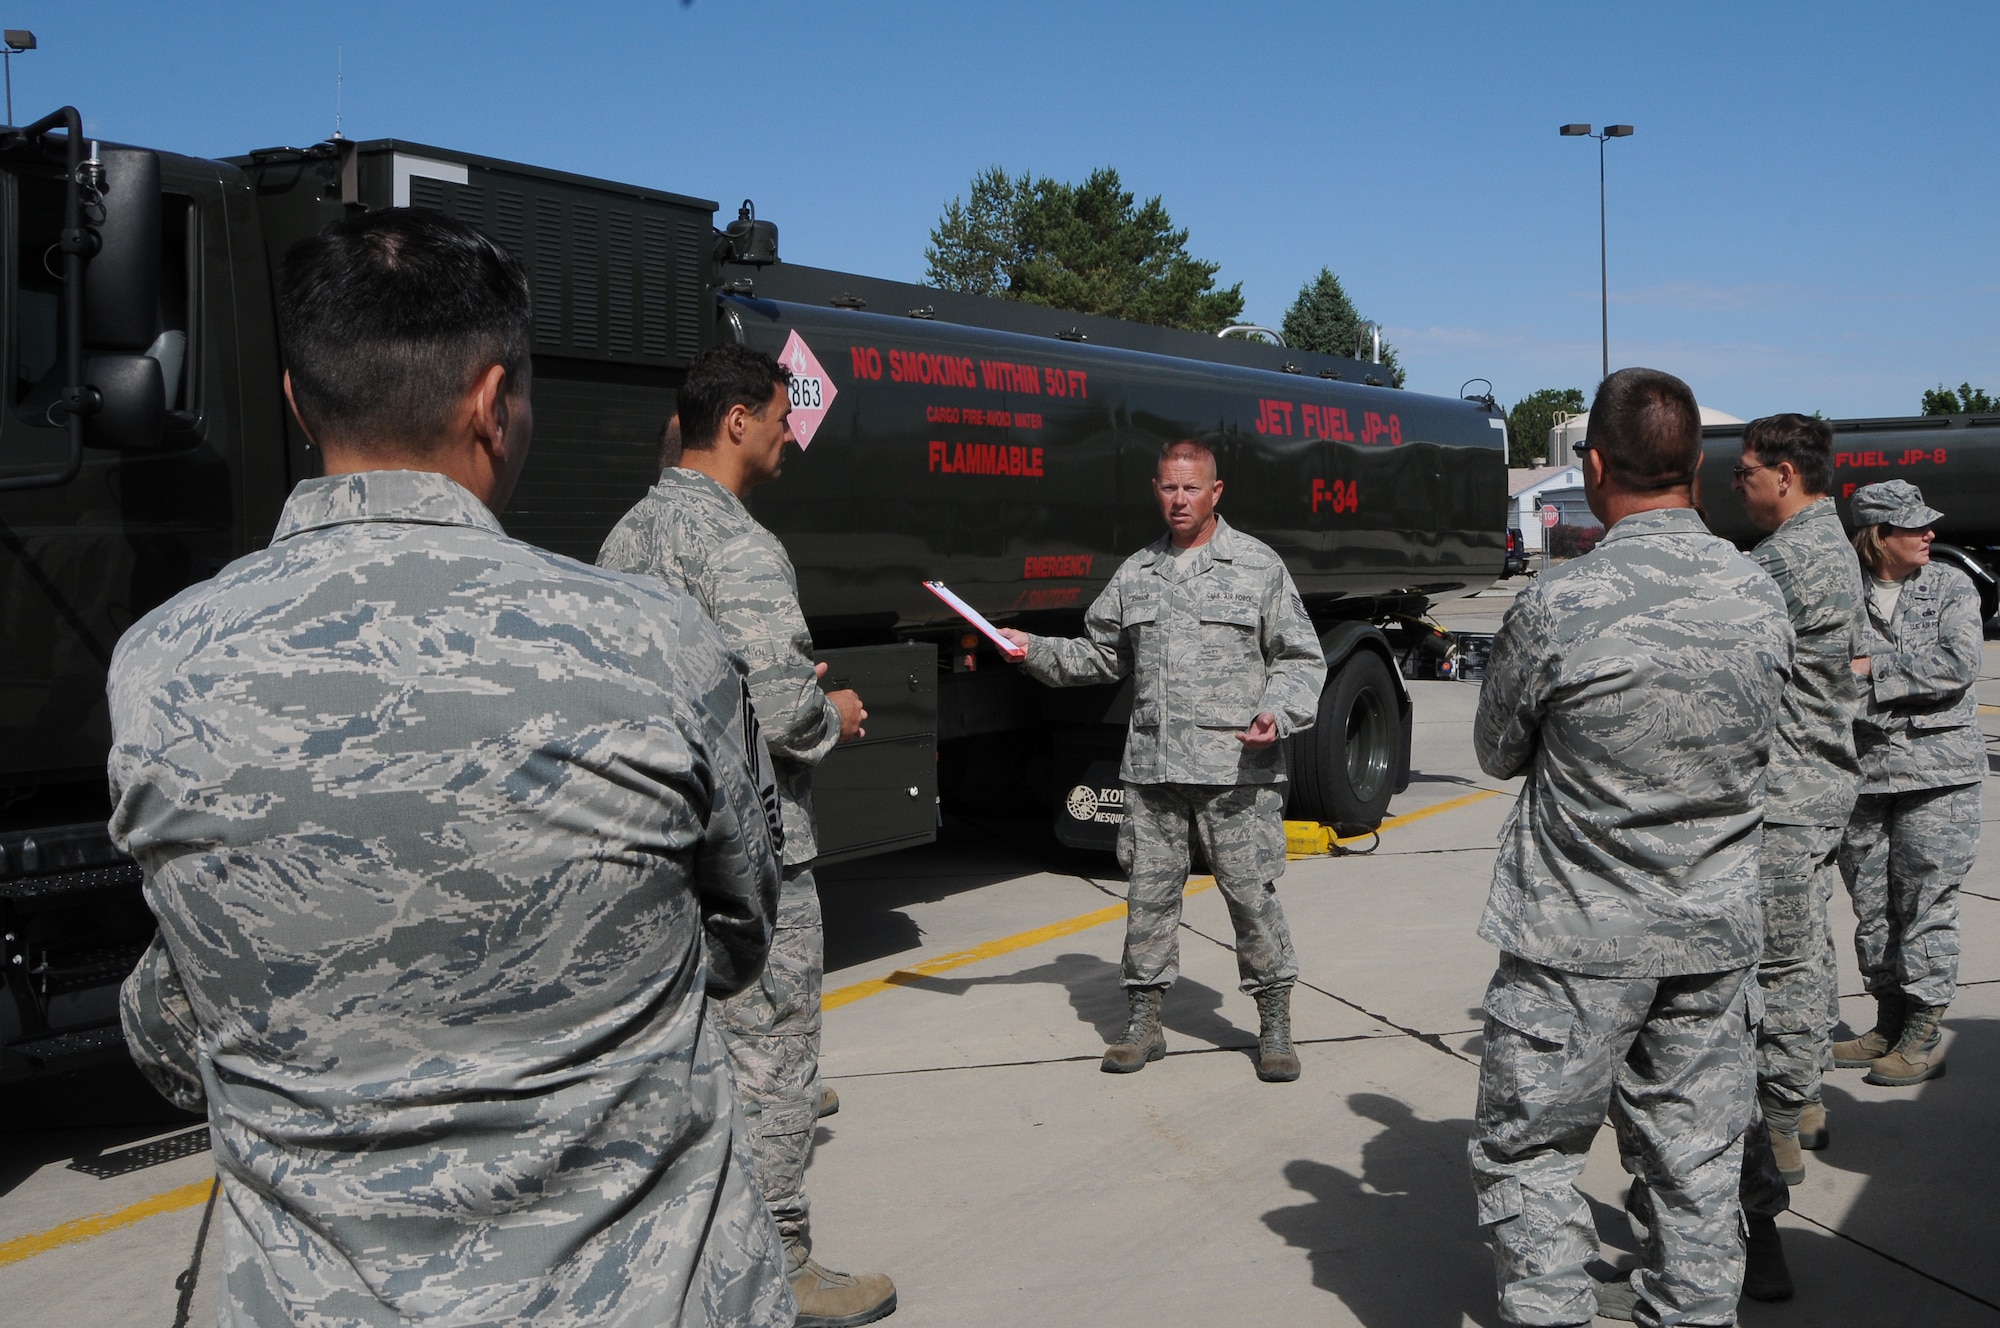 Tech. Sgt. Brett Johnson, 124th Fighter Wing Logistics Readiness Squadron Fuels, explained the safety precautions taken while fueling an A-10 Thunderbolt II to a tour group at the LRS open house at Gowen Field July 13. (Air National Guard Photo by Tech. Sgt. Sarah Pokorney)